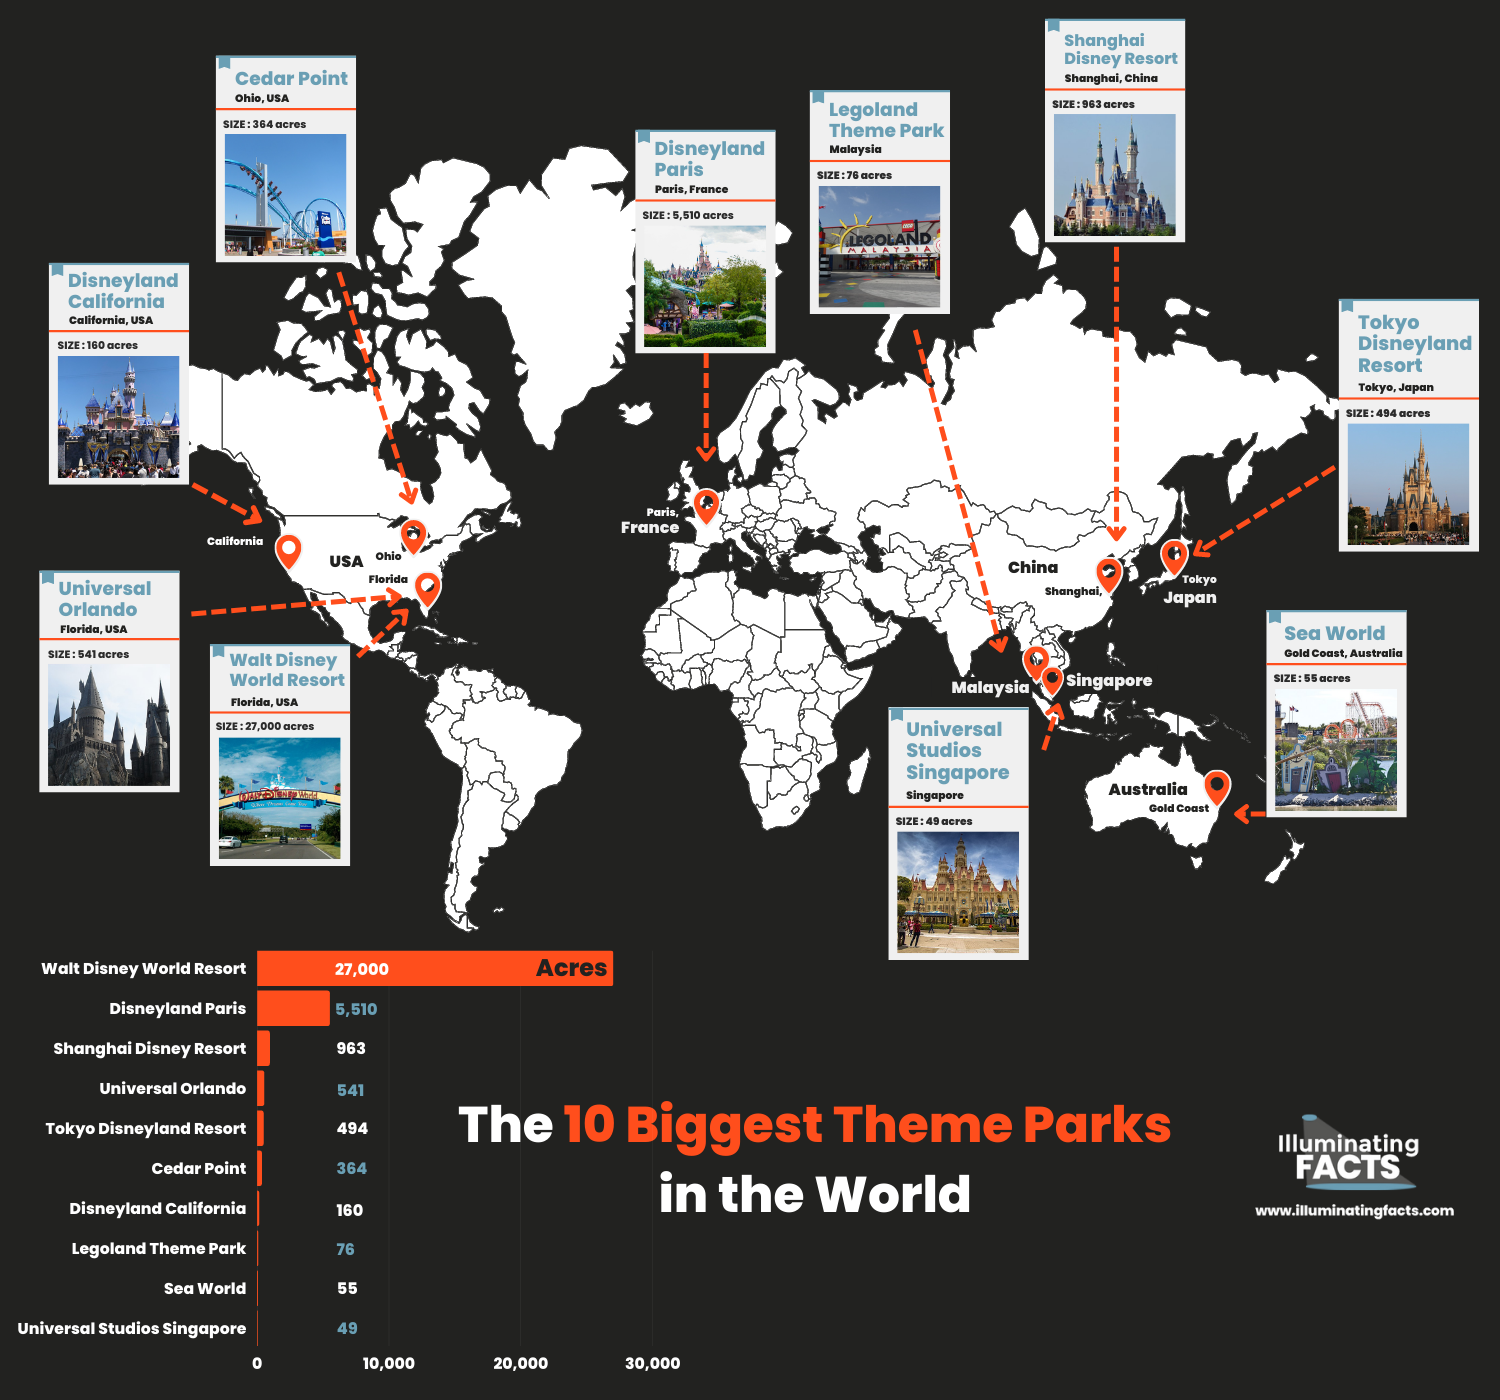 The 10 Biggest Theme Parks in the World